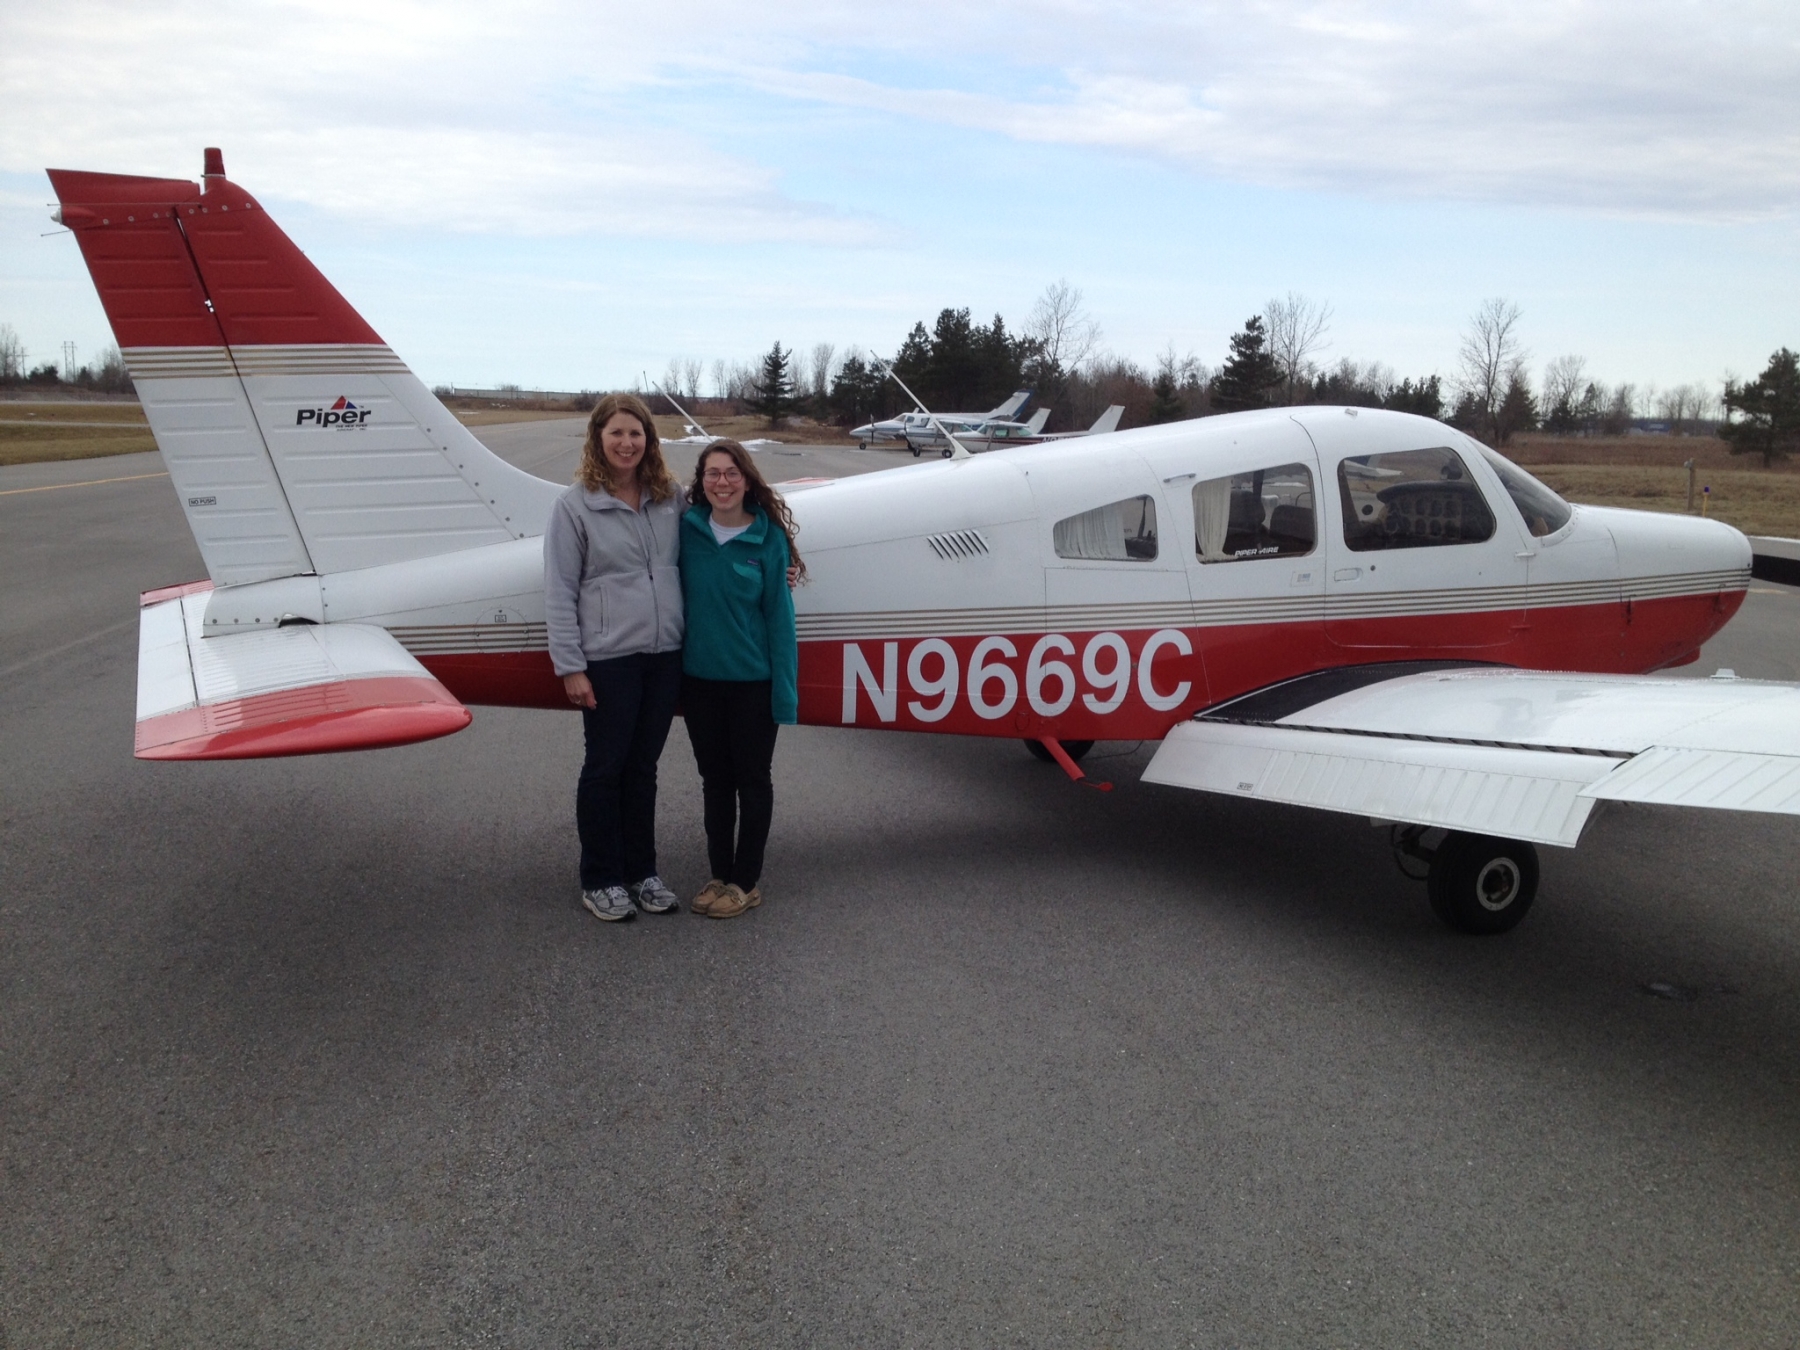 Lisa and her daughter Becky next to airplane Lisa took her flight test in